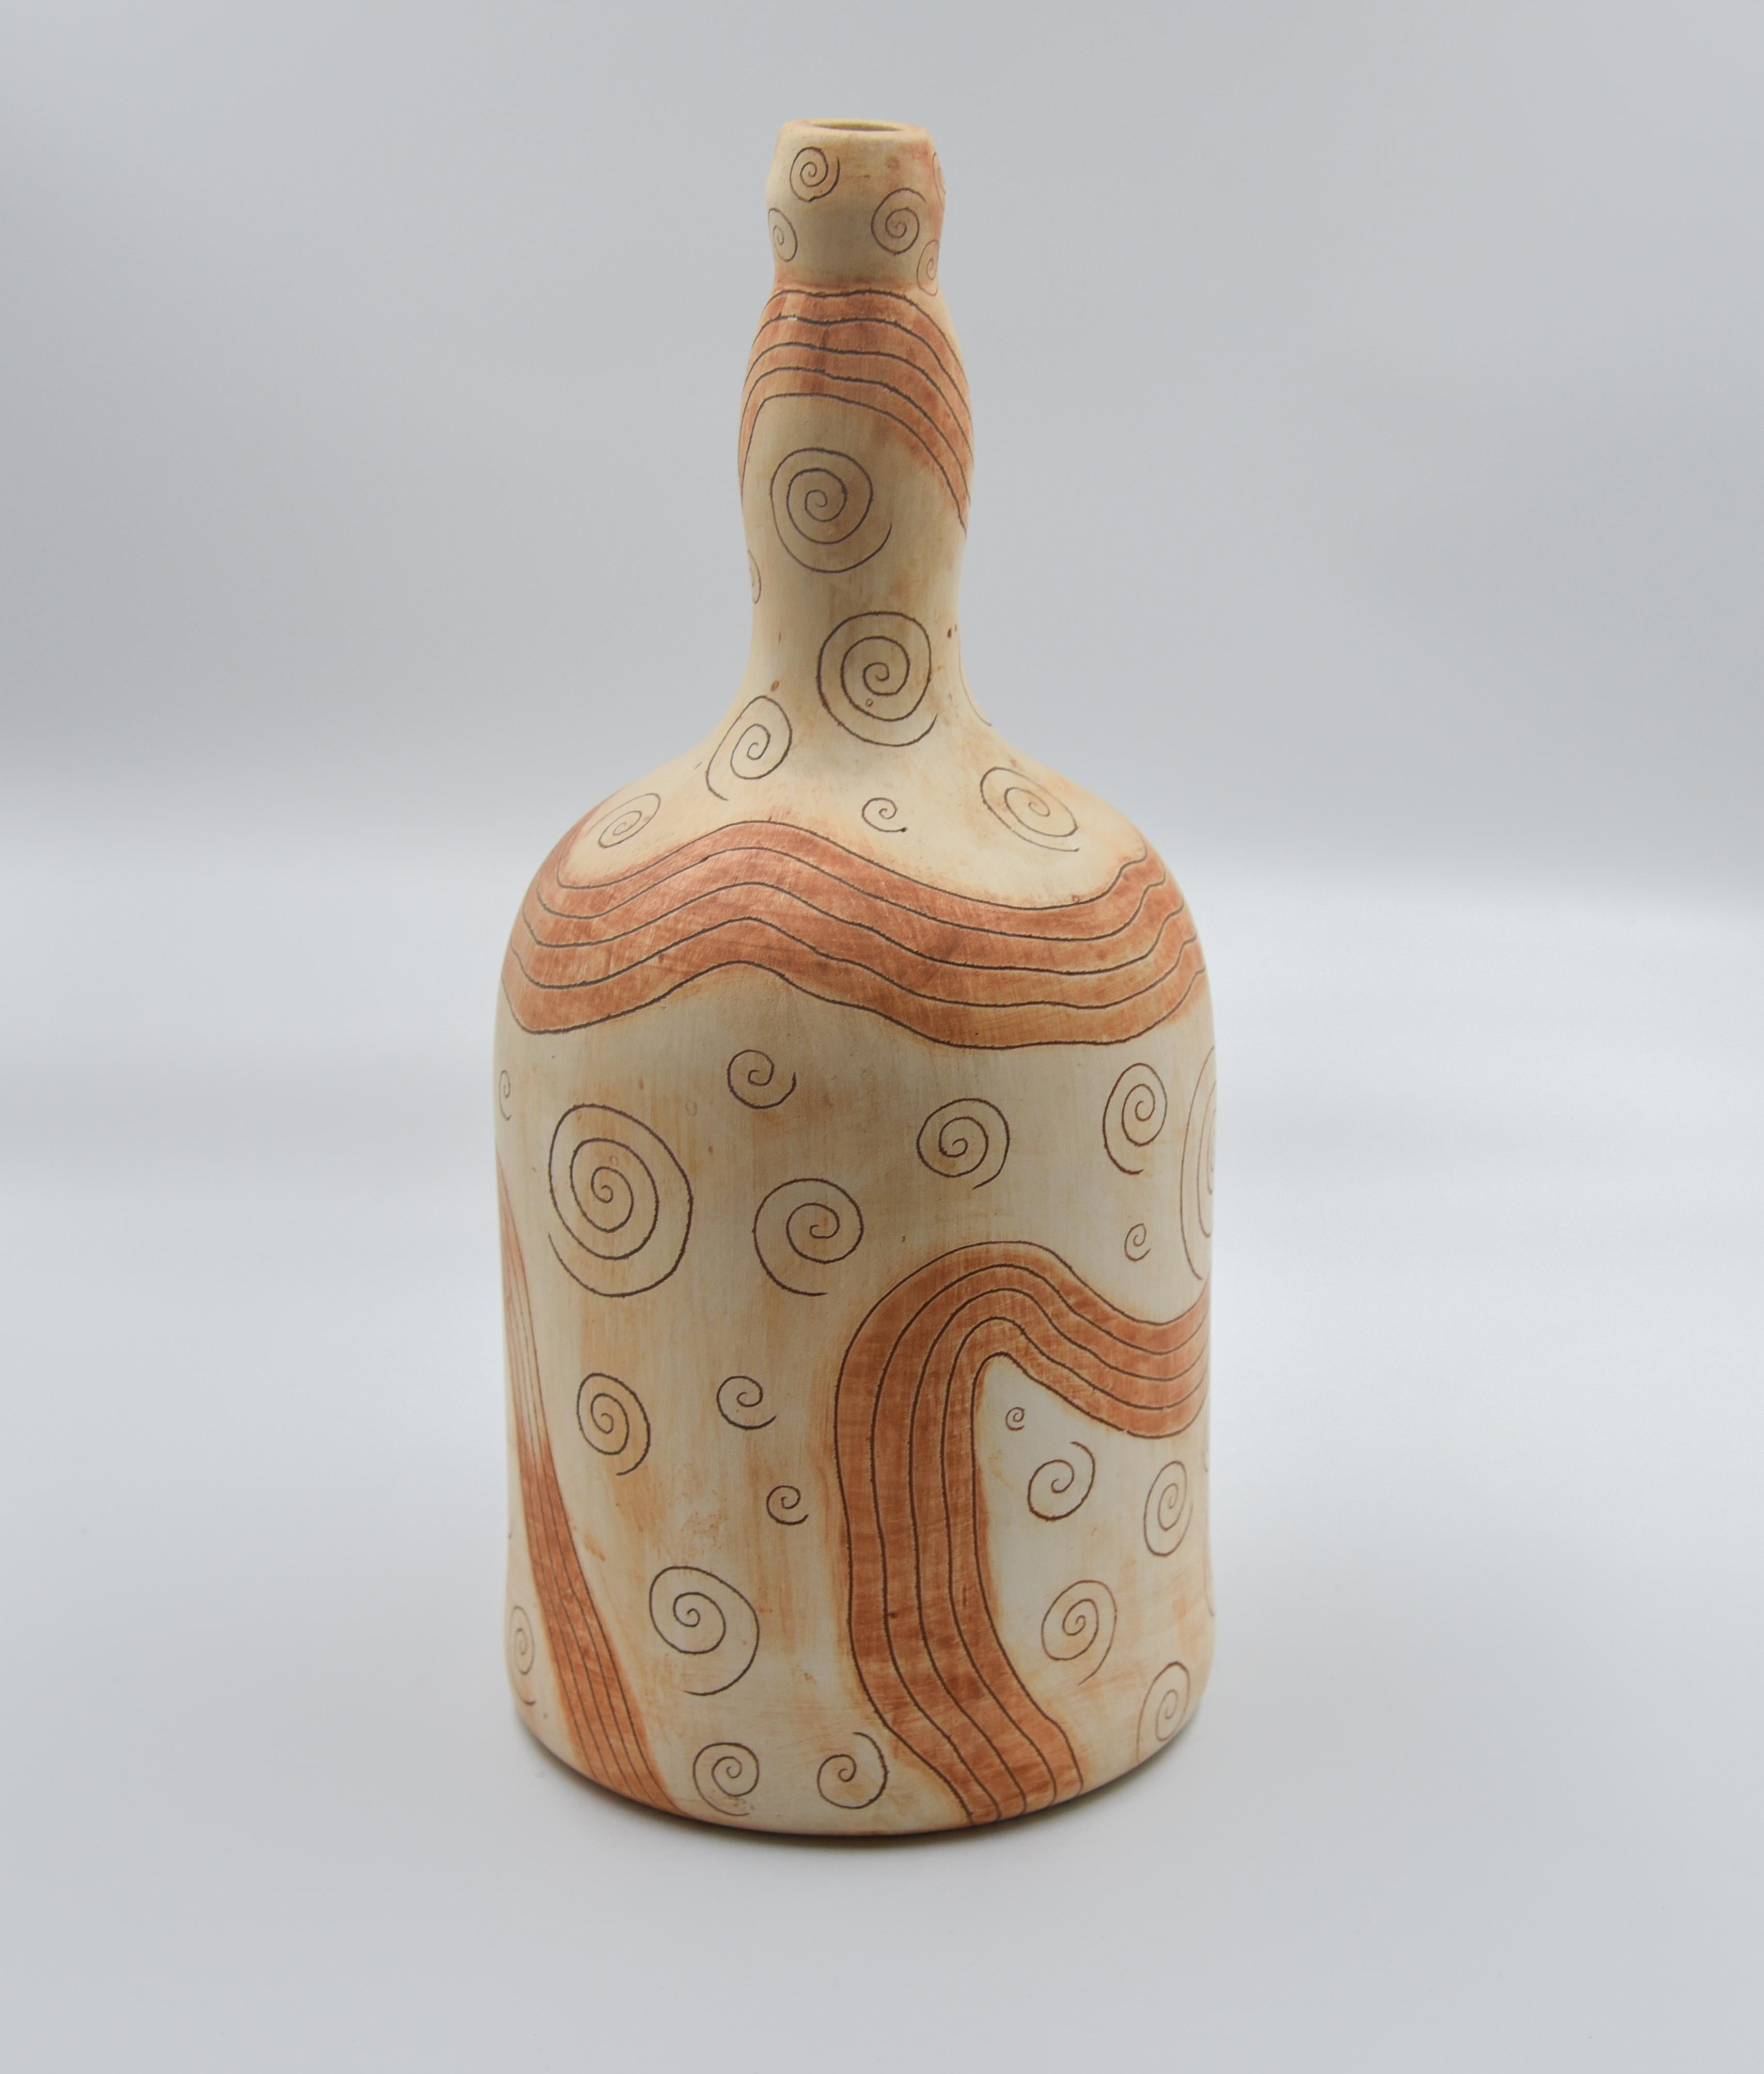 This rustic mezcal bottle is a replica of an antique bottle which was used to store mezcal, drunken during folk theaters in Oaxaca, Mexico. The bottle is done with ceramic graffiti sgraffito technique which is later painted with oxide and earth. In